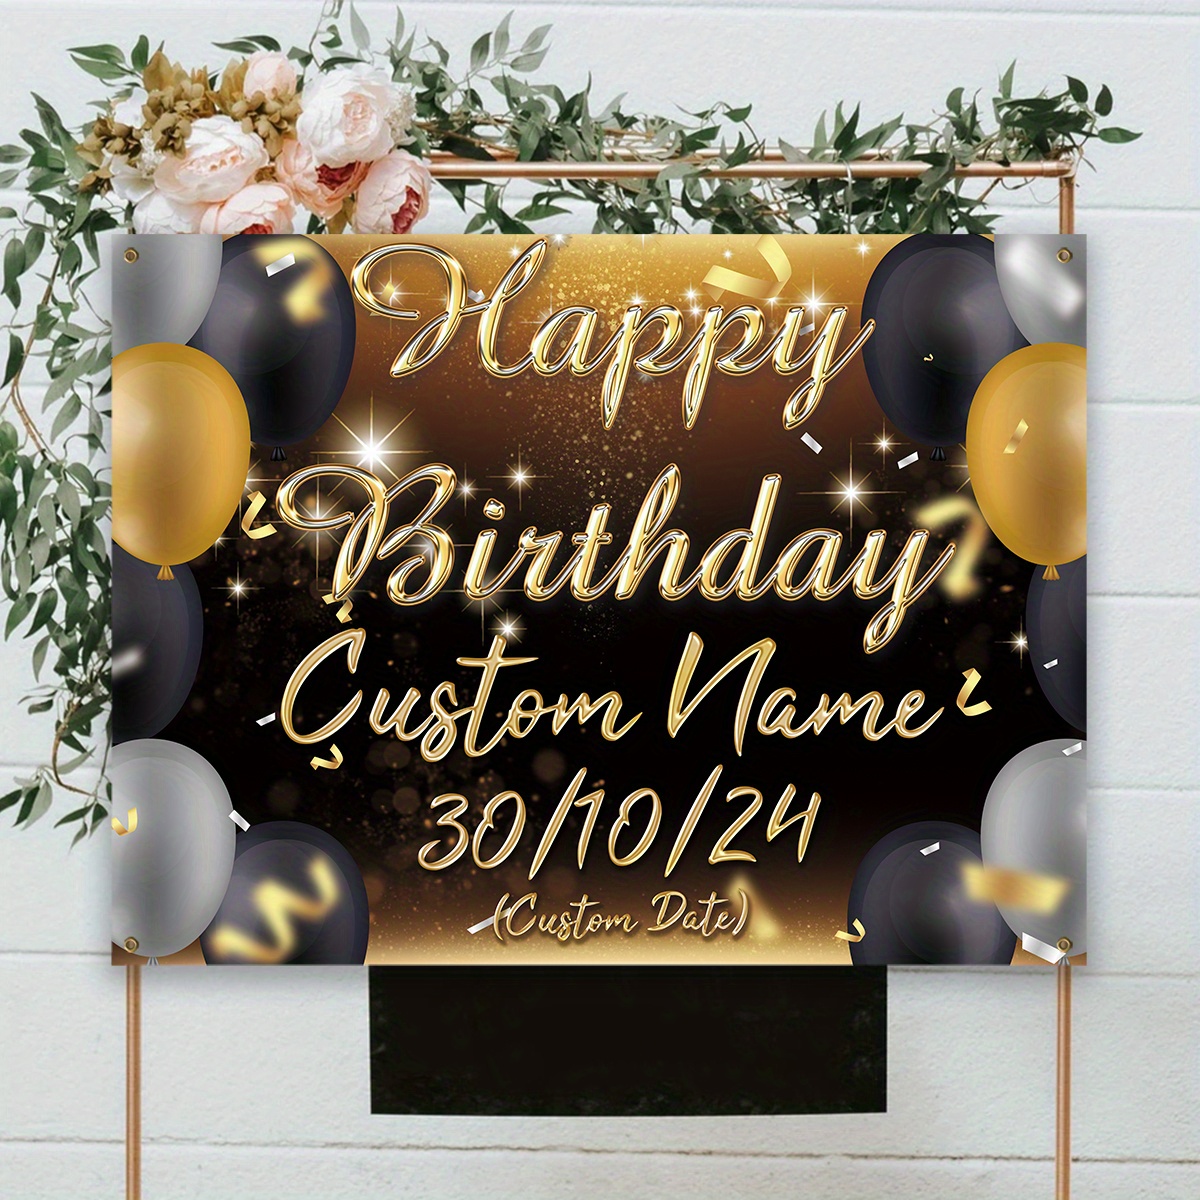 

Custom Happy Birthday Banner - Large Polyester Backdrop With Name & Date, Golden Finish, Perfect For Photo Booths & Party Decorations